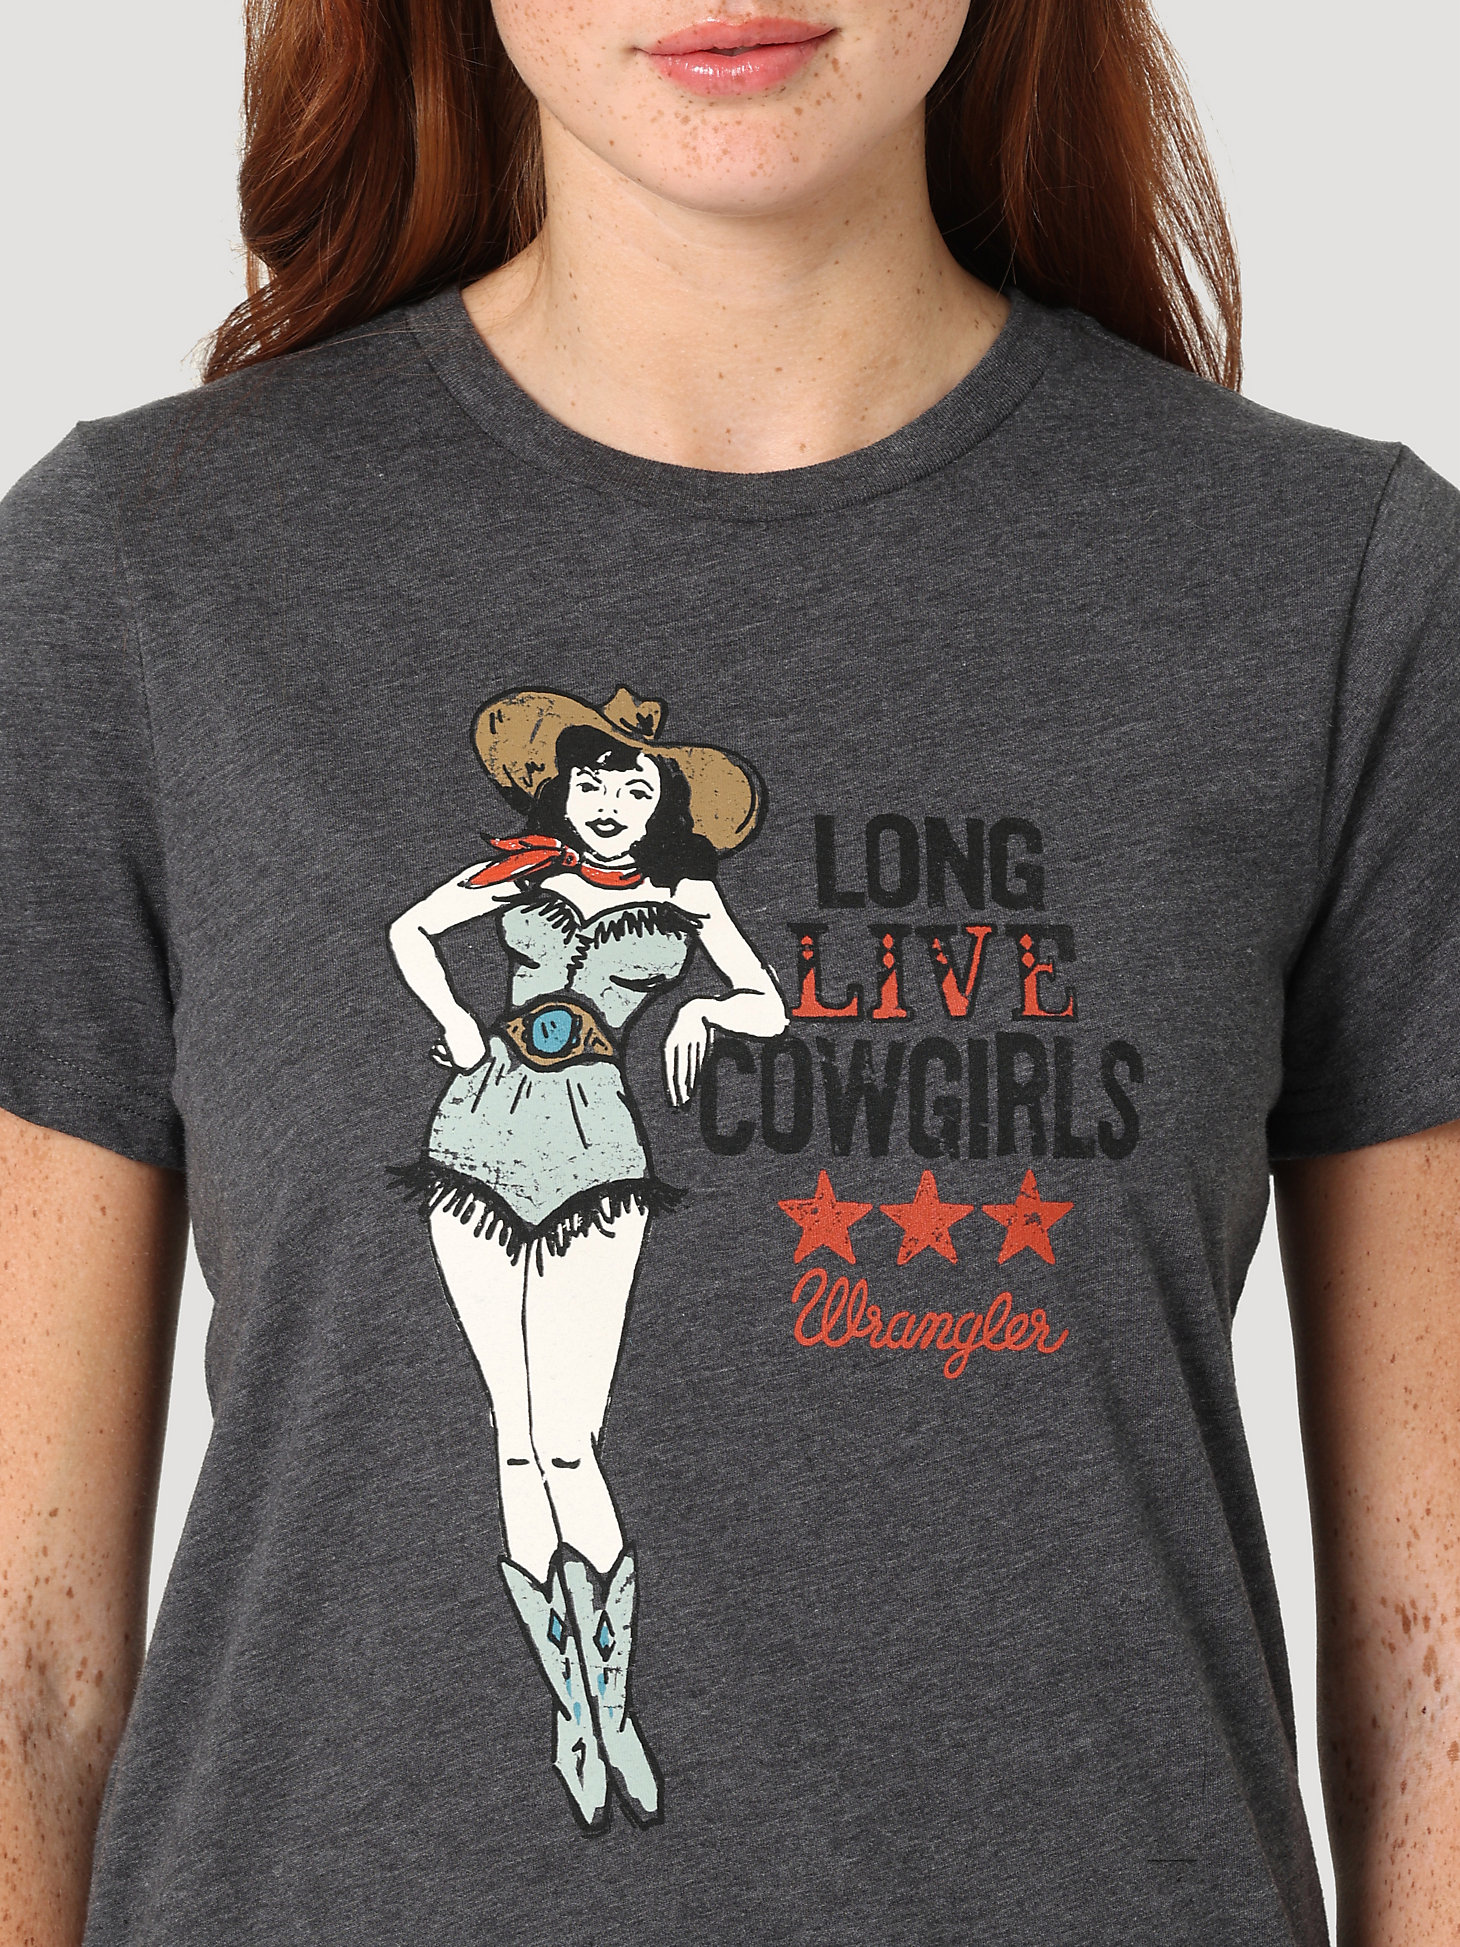 Womens Cowgirl Pin-Up Tee:Charcoal Heather:L alternative view 1